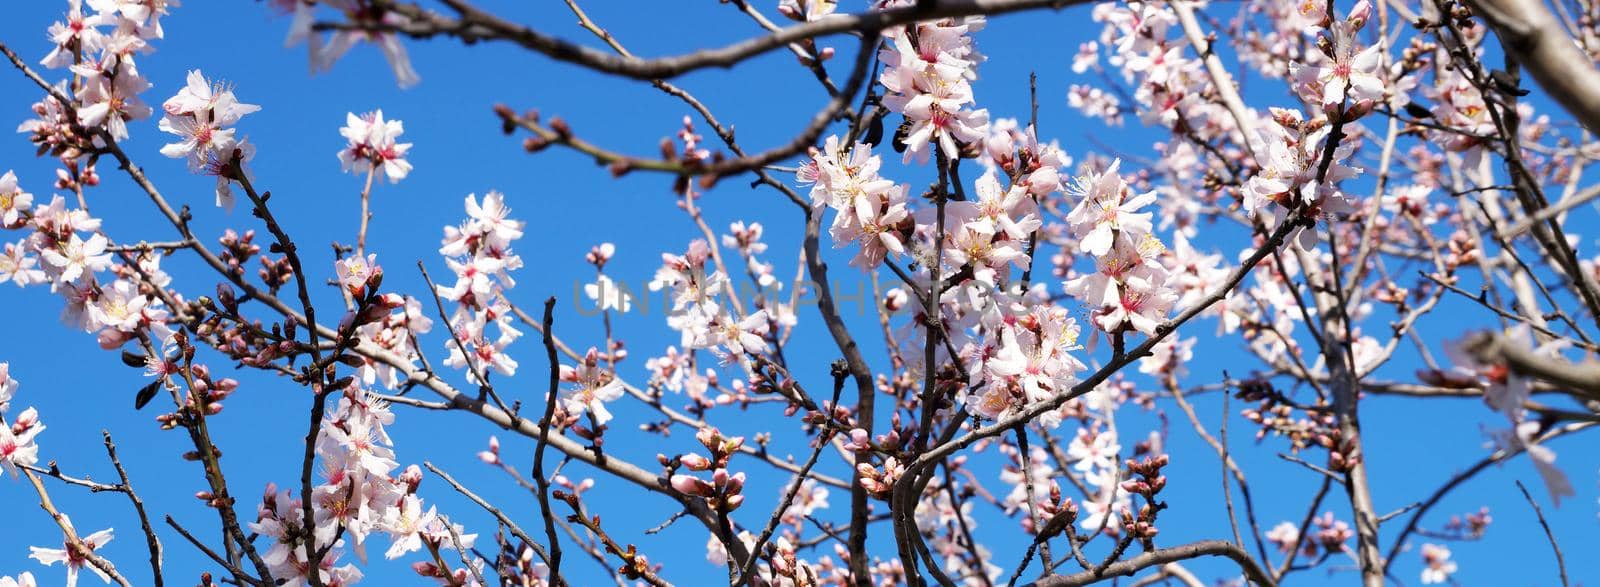 blooming spring branches against a clear blue sky by Annado